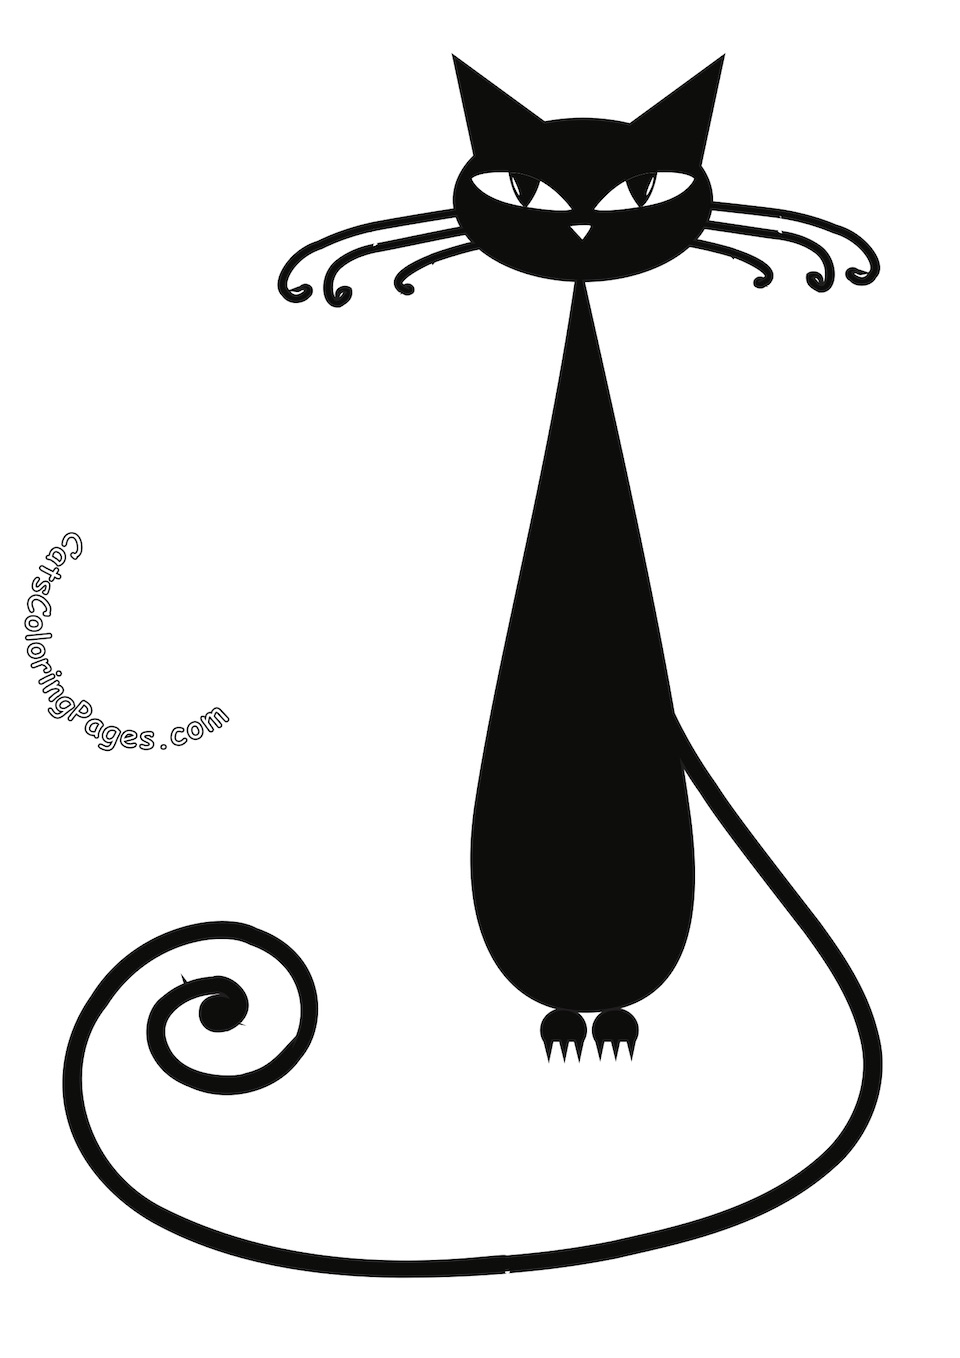 Sitting Black Cat Colored Coloring Page